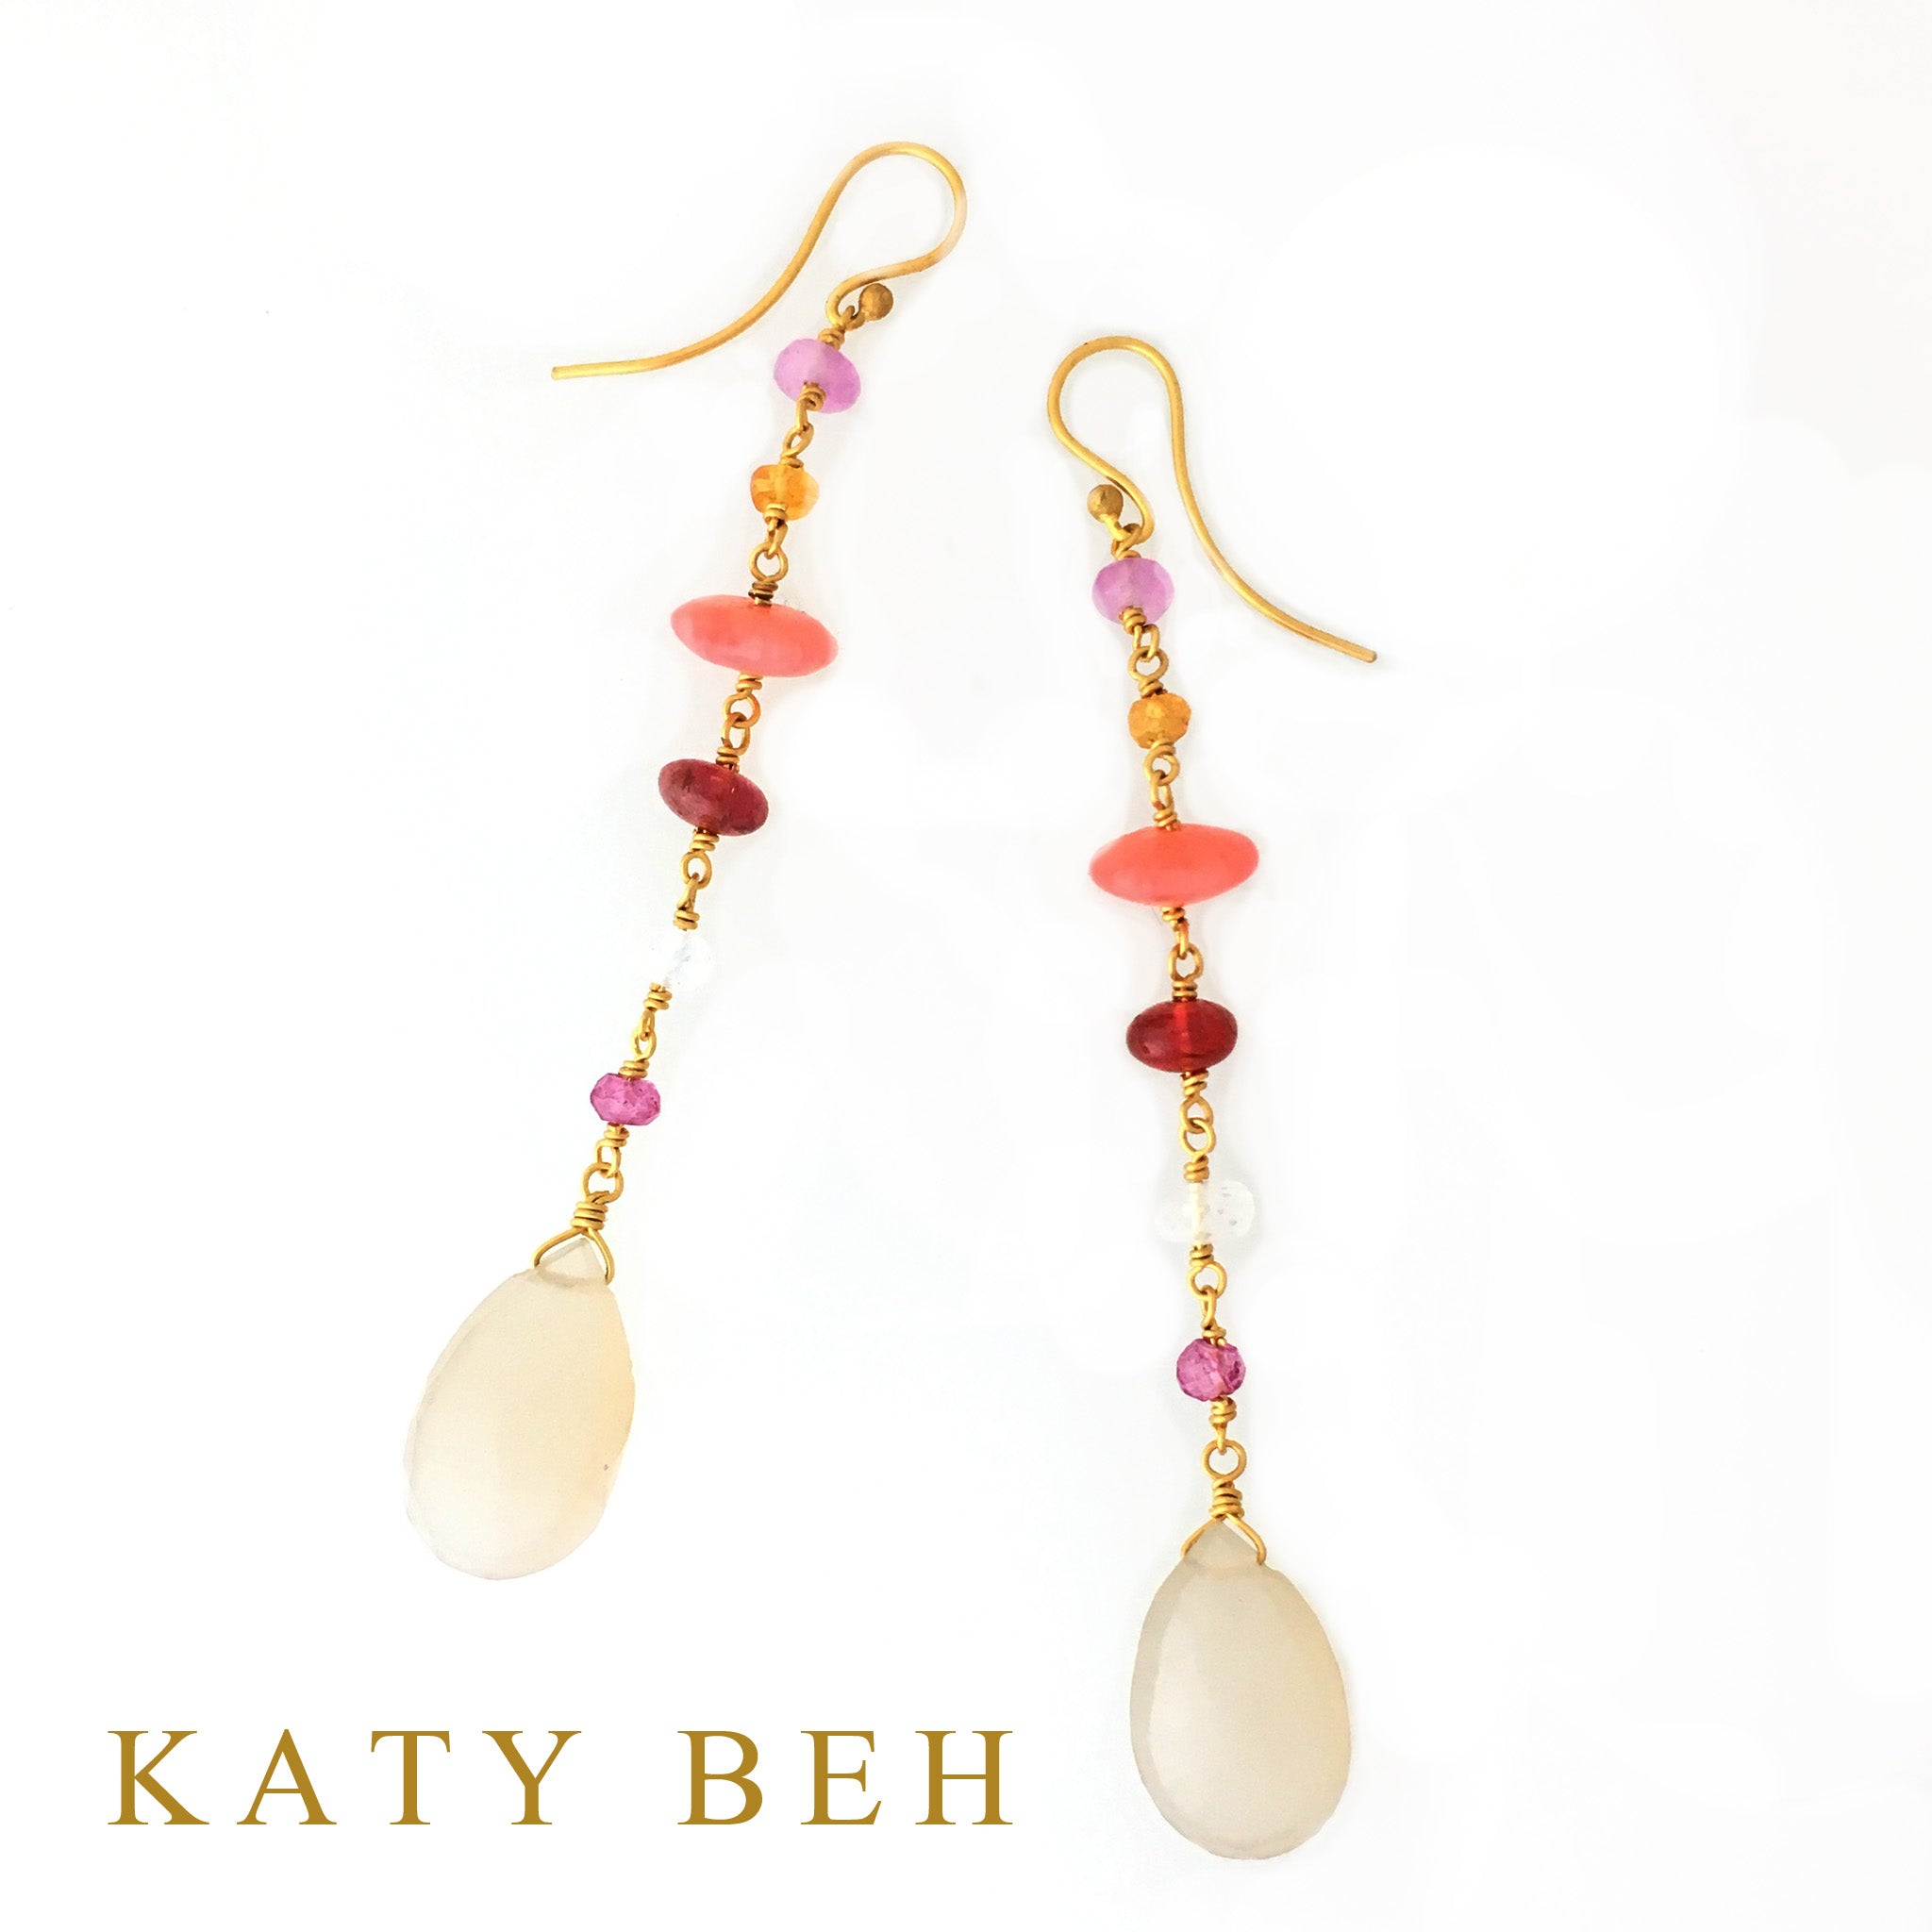 So Coral, Spinel & Moonstone Mix Earrings